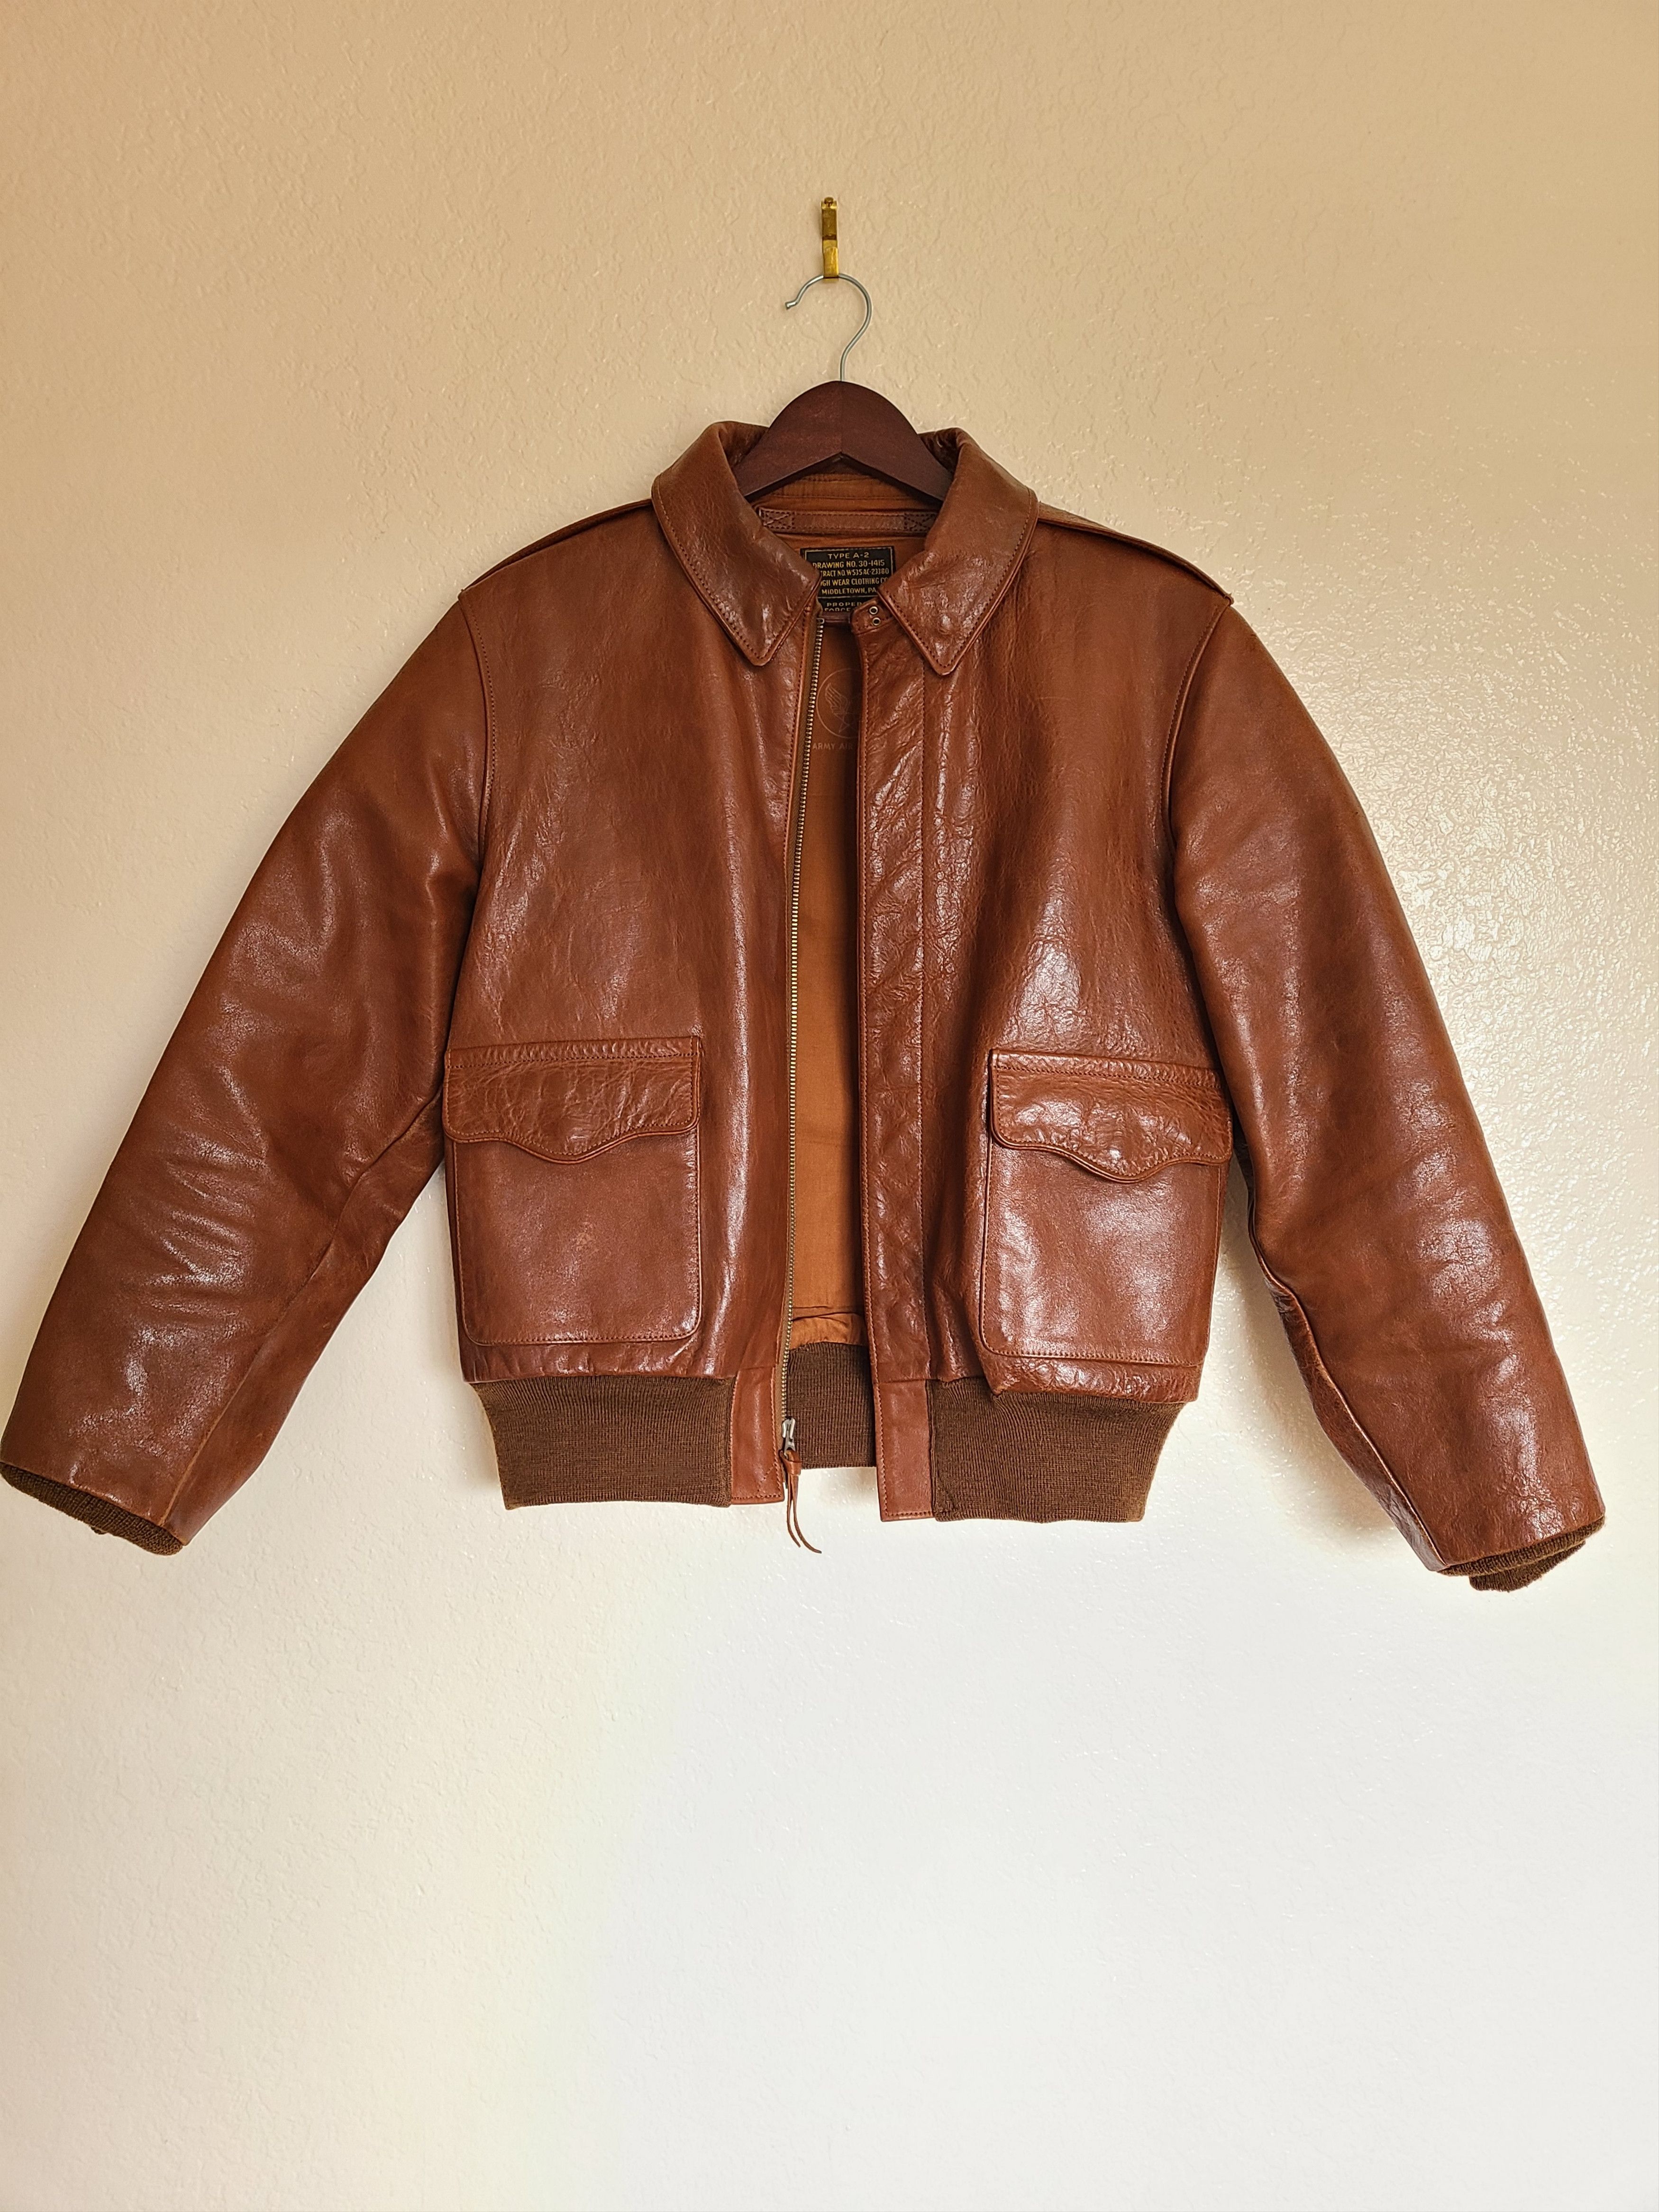 The Real McCoy's A-2 Jacket Russet Horsehide Size US S / EU 44-46 / 1 - 2 Preview